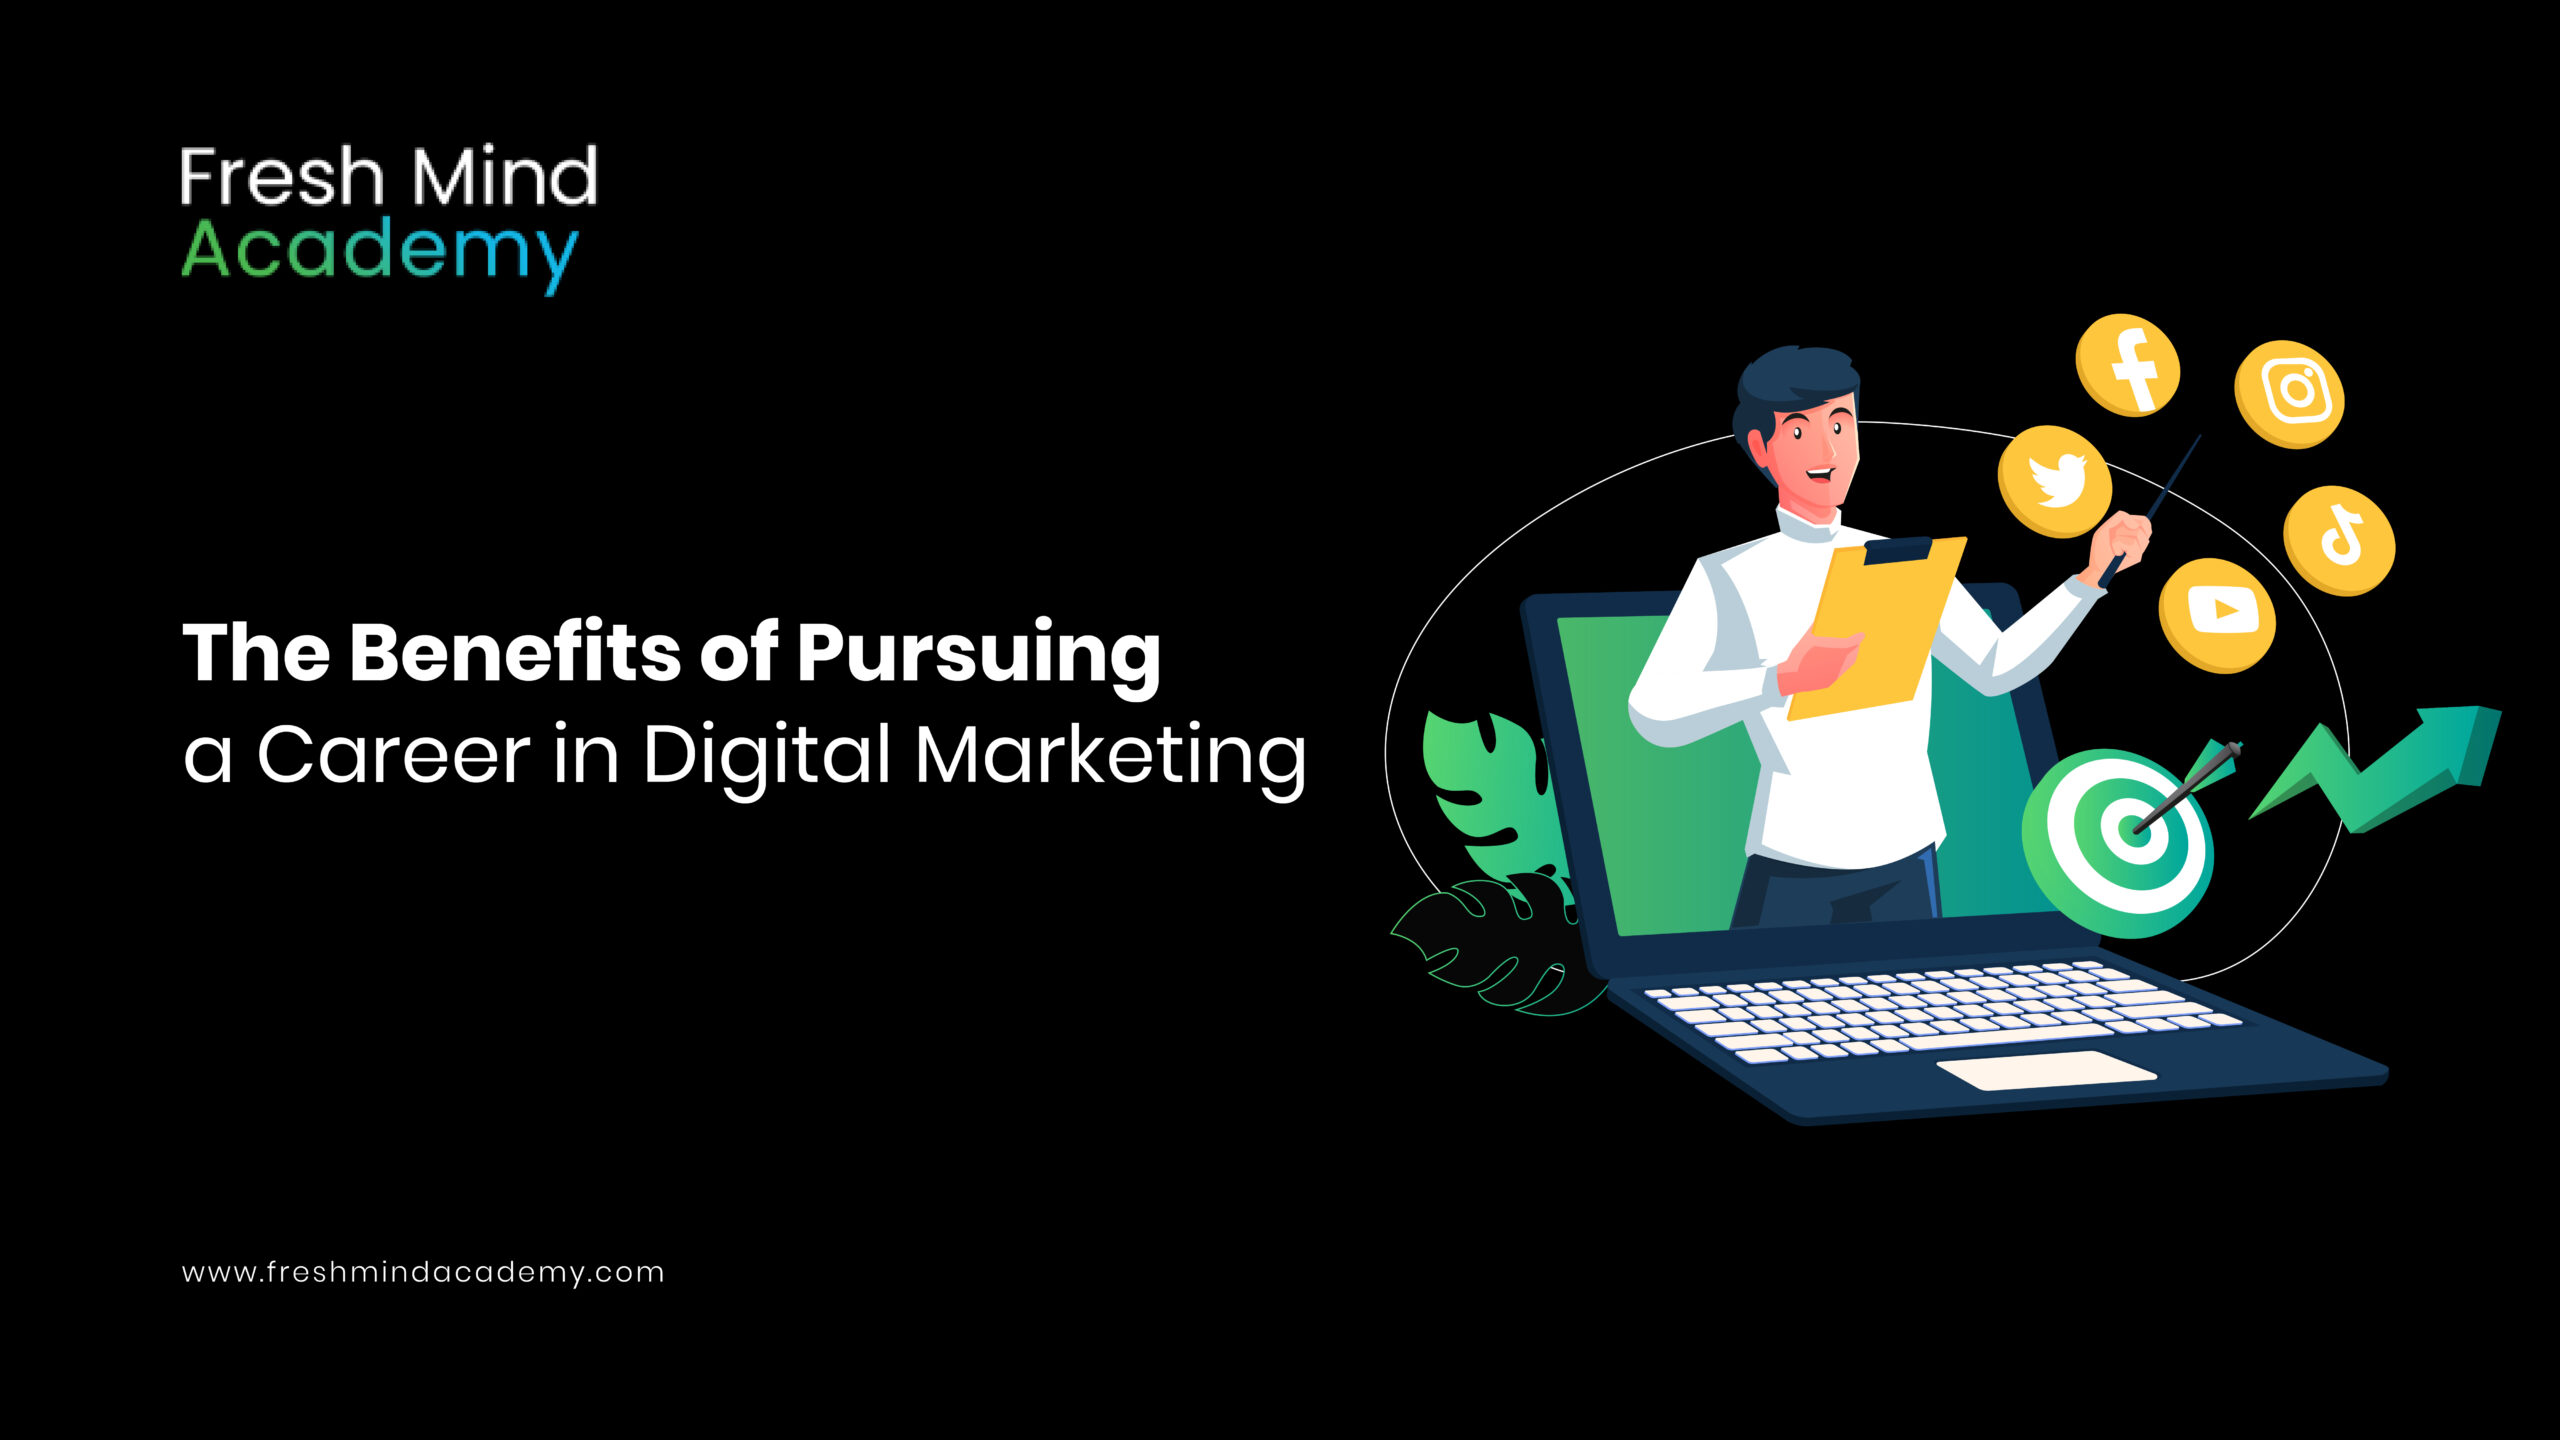 The benefits of pursuing a career in digital marketing